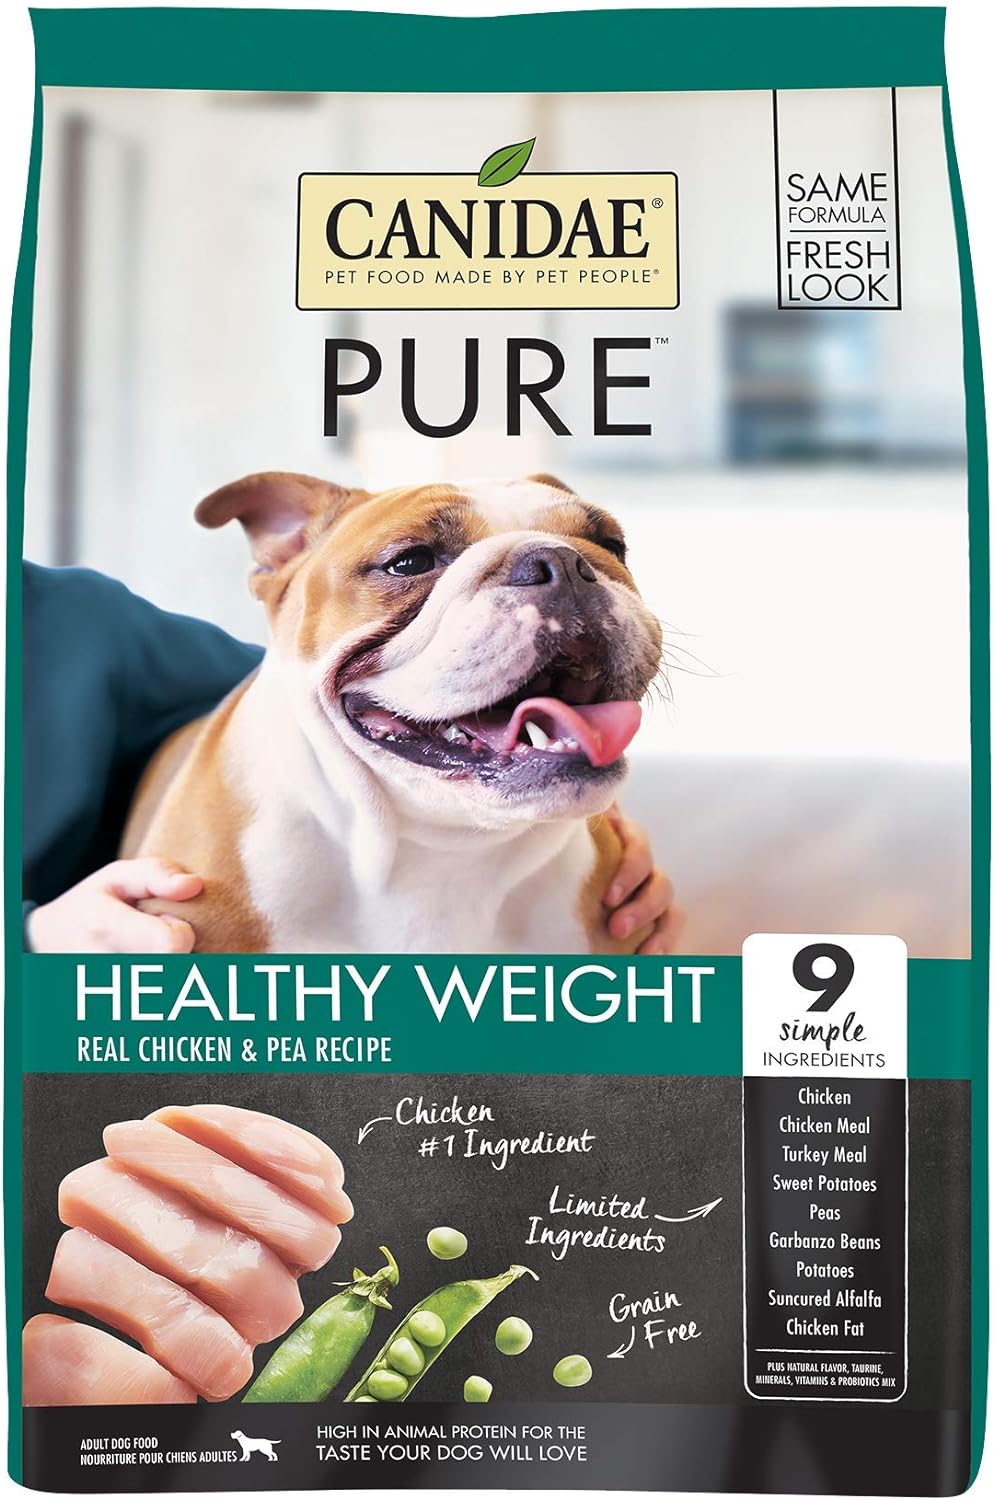 Canidae Pure Grain-Free Healthy Weight Real Chicken & Pea Recipe Dry Dog Food – Gallery Image 1